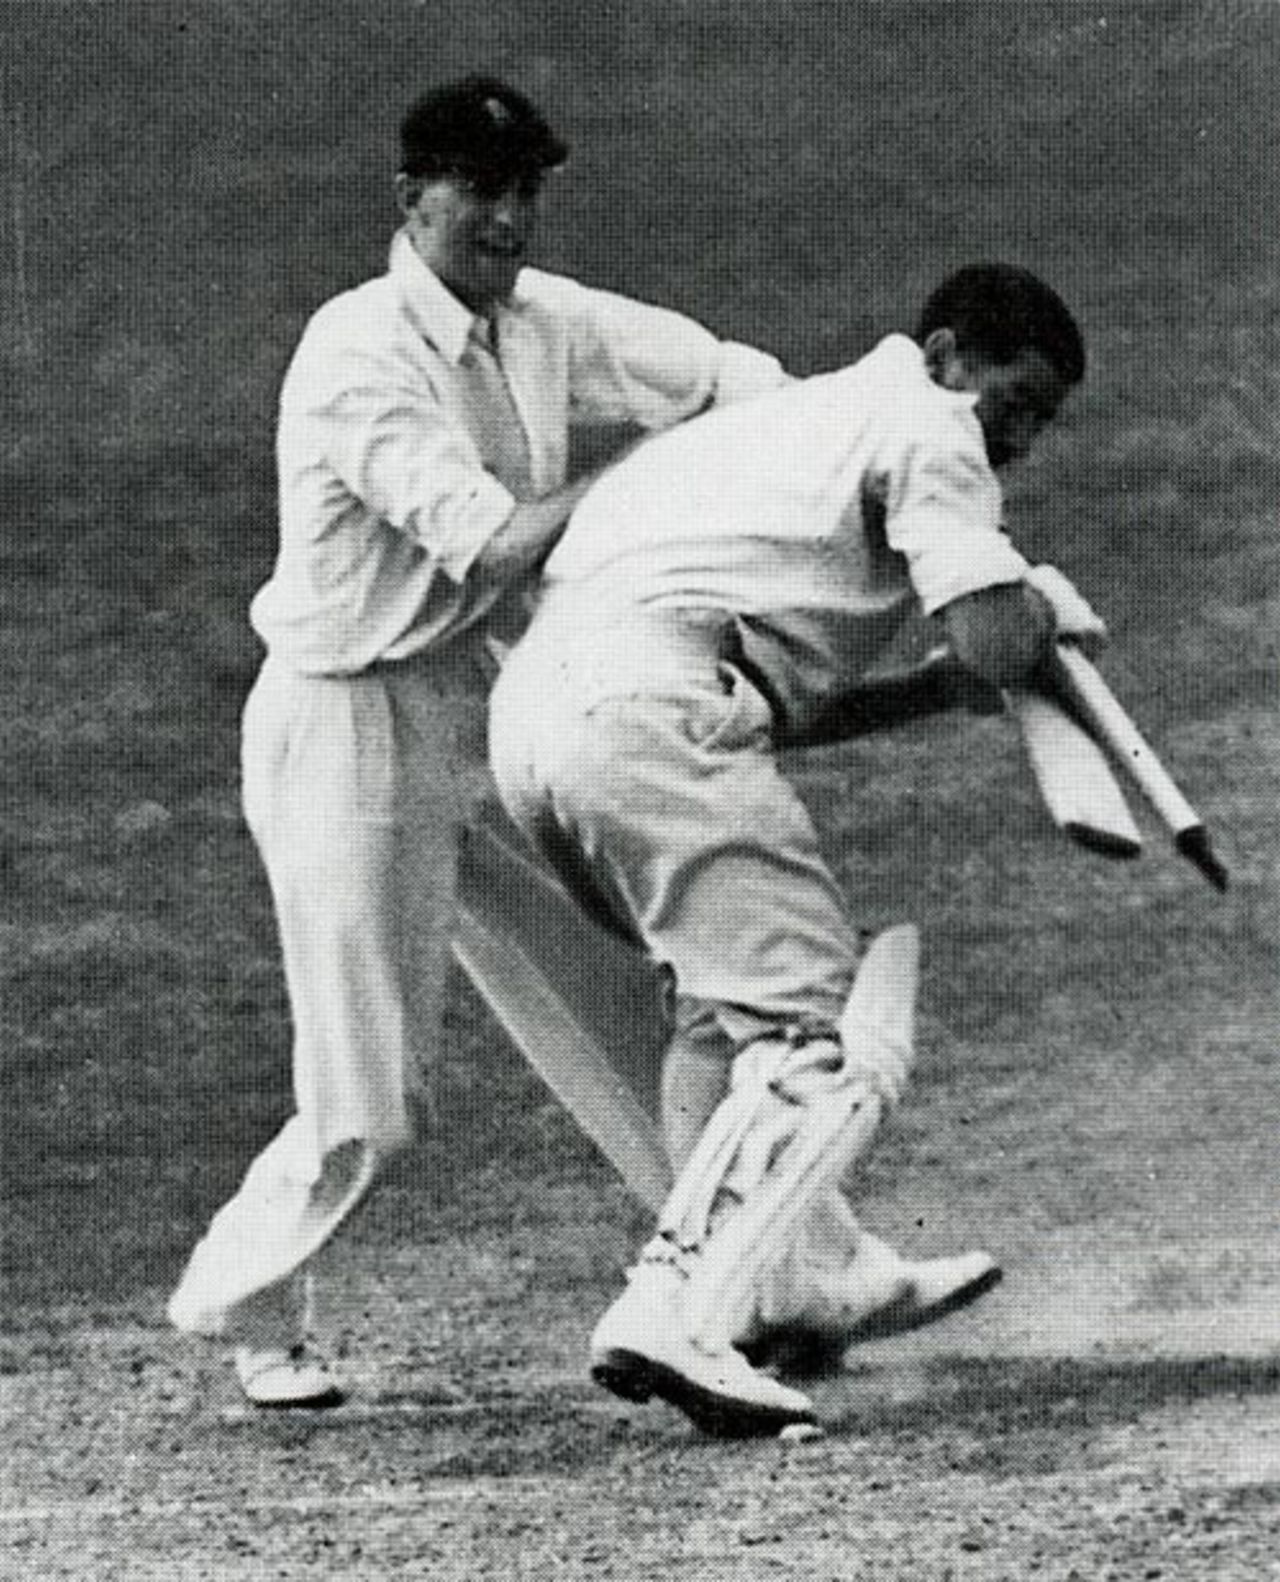 Len Hutton good-naturedly scraps with Chuck Fleetwood-Smith for a souvenir, England v Australia, 5th Test, The Oval, August 24, 1938